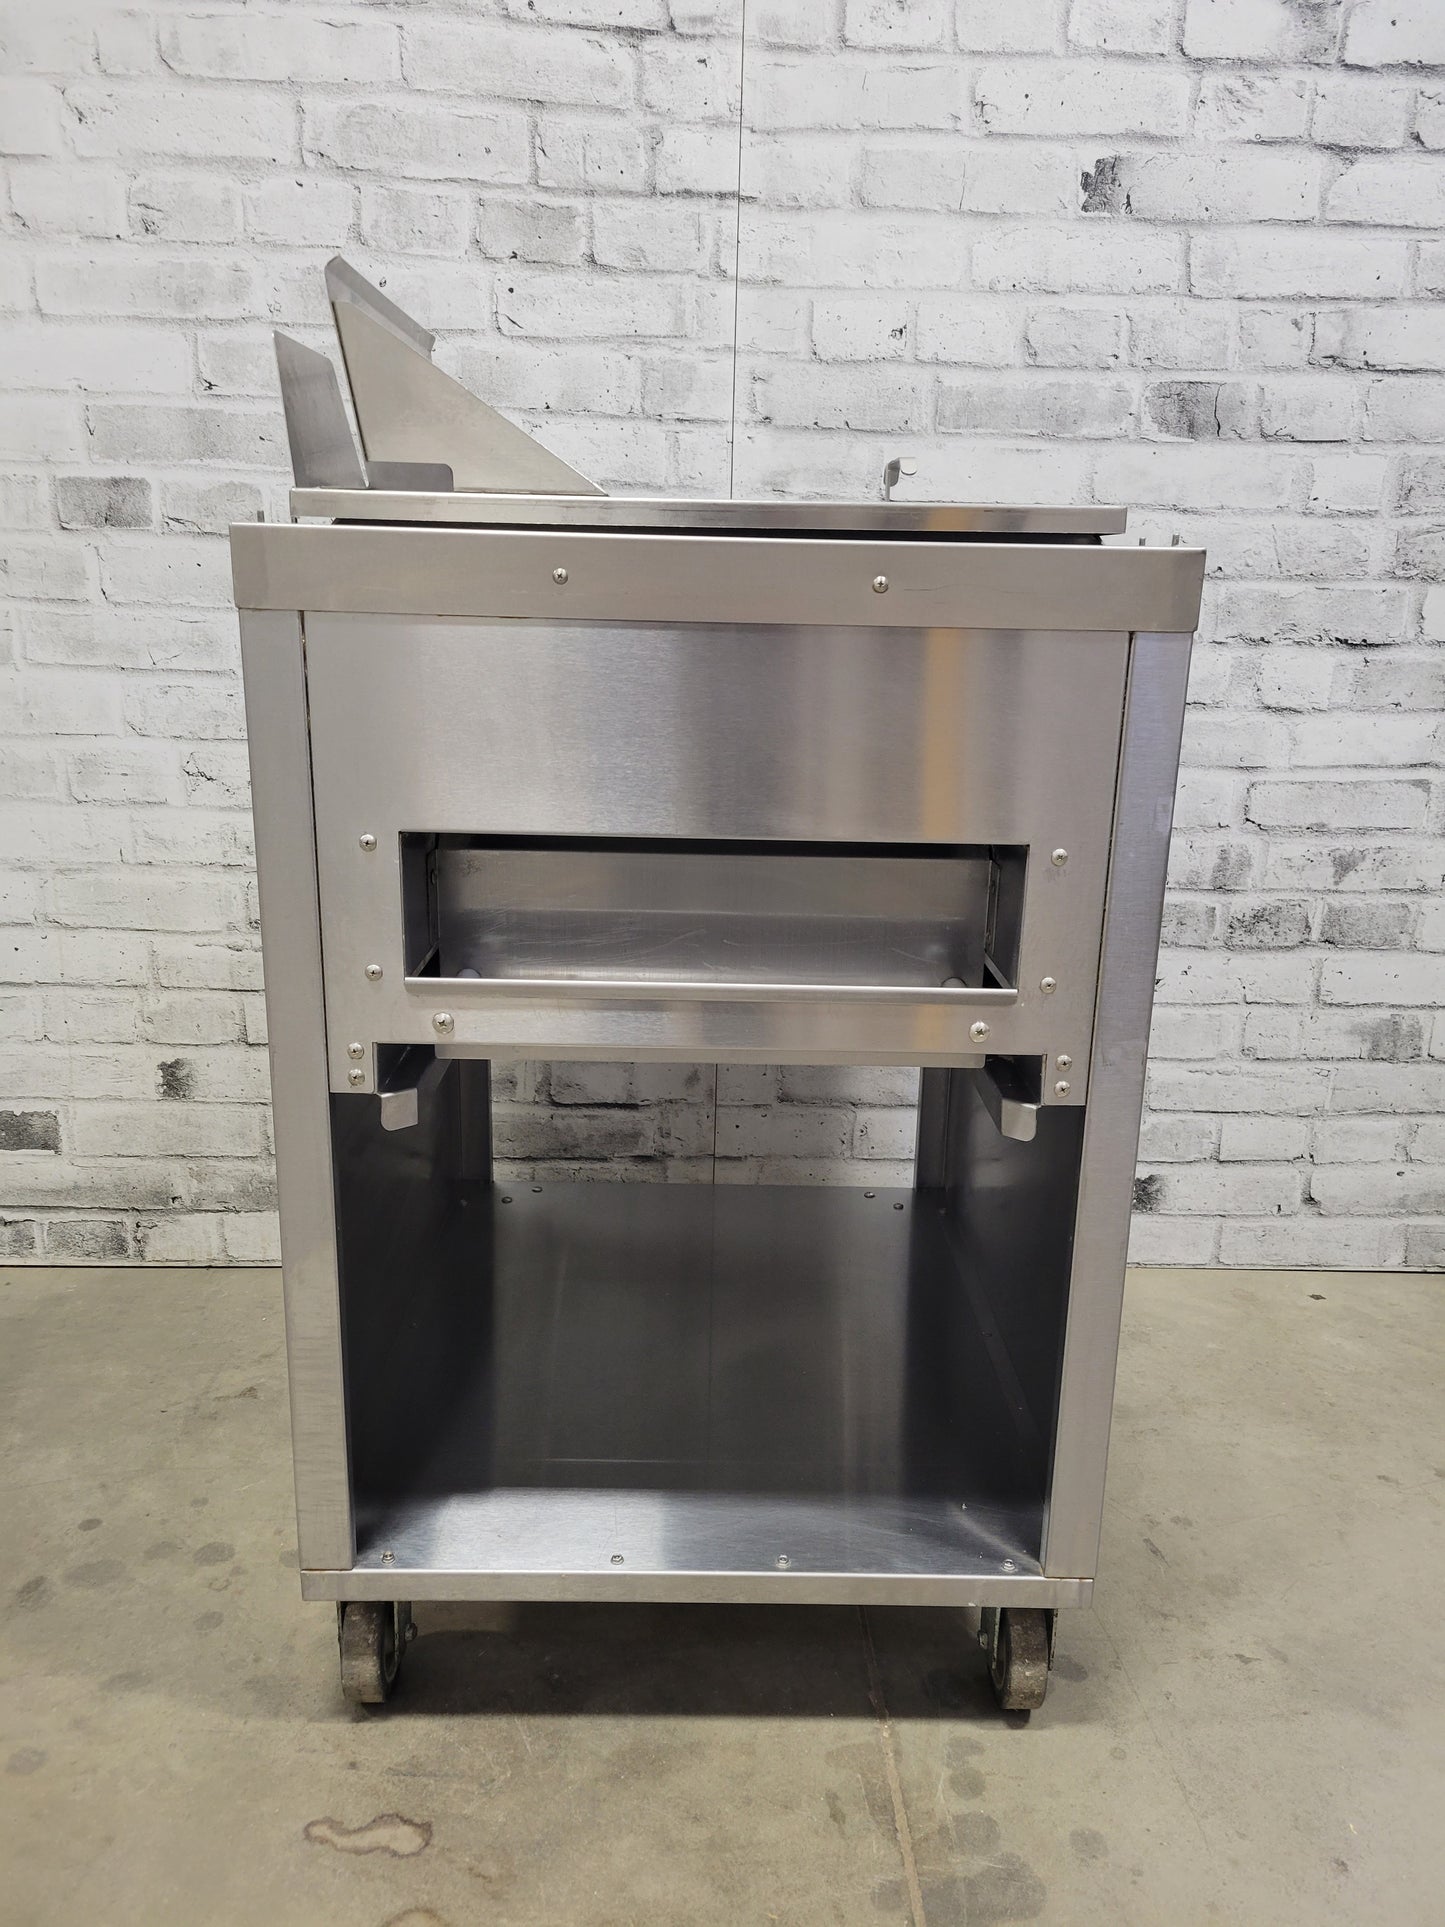 BSF PRE-OWNED Giles BBT-0 Breading Station